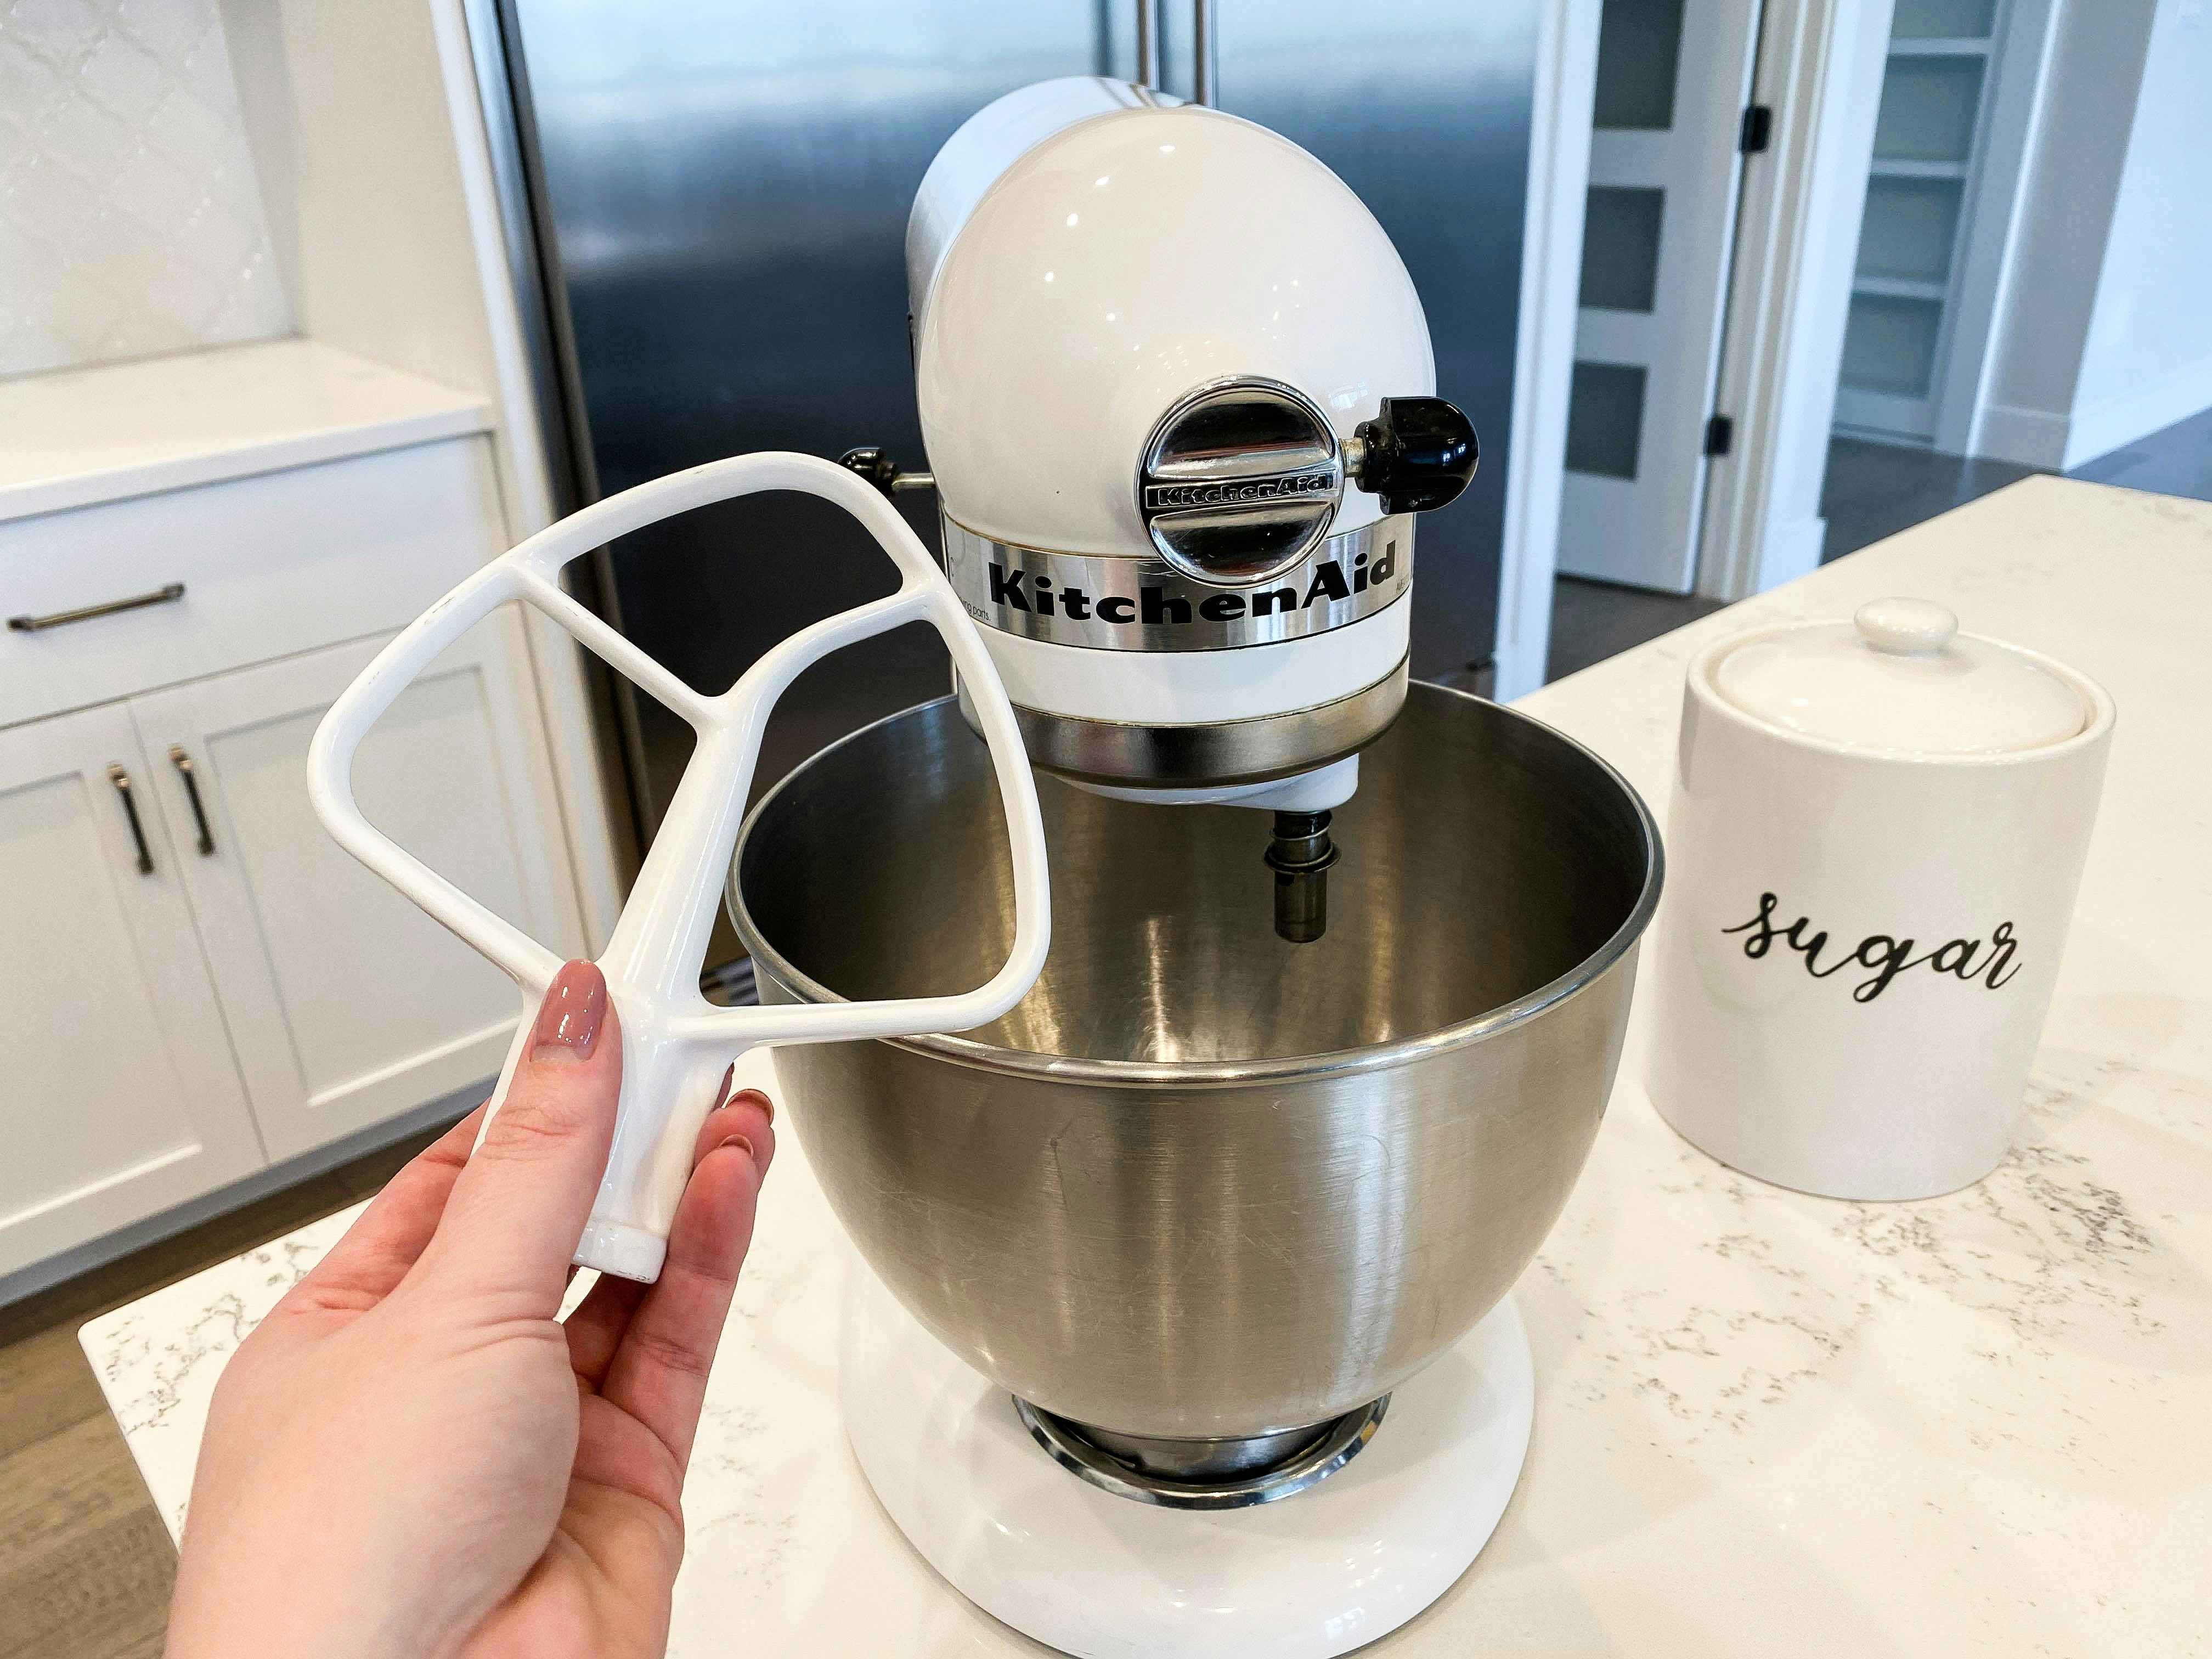 A Kitchenaid mixer on a counter with a hand holding an attachment piece.